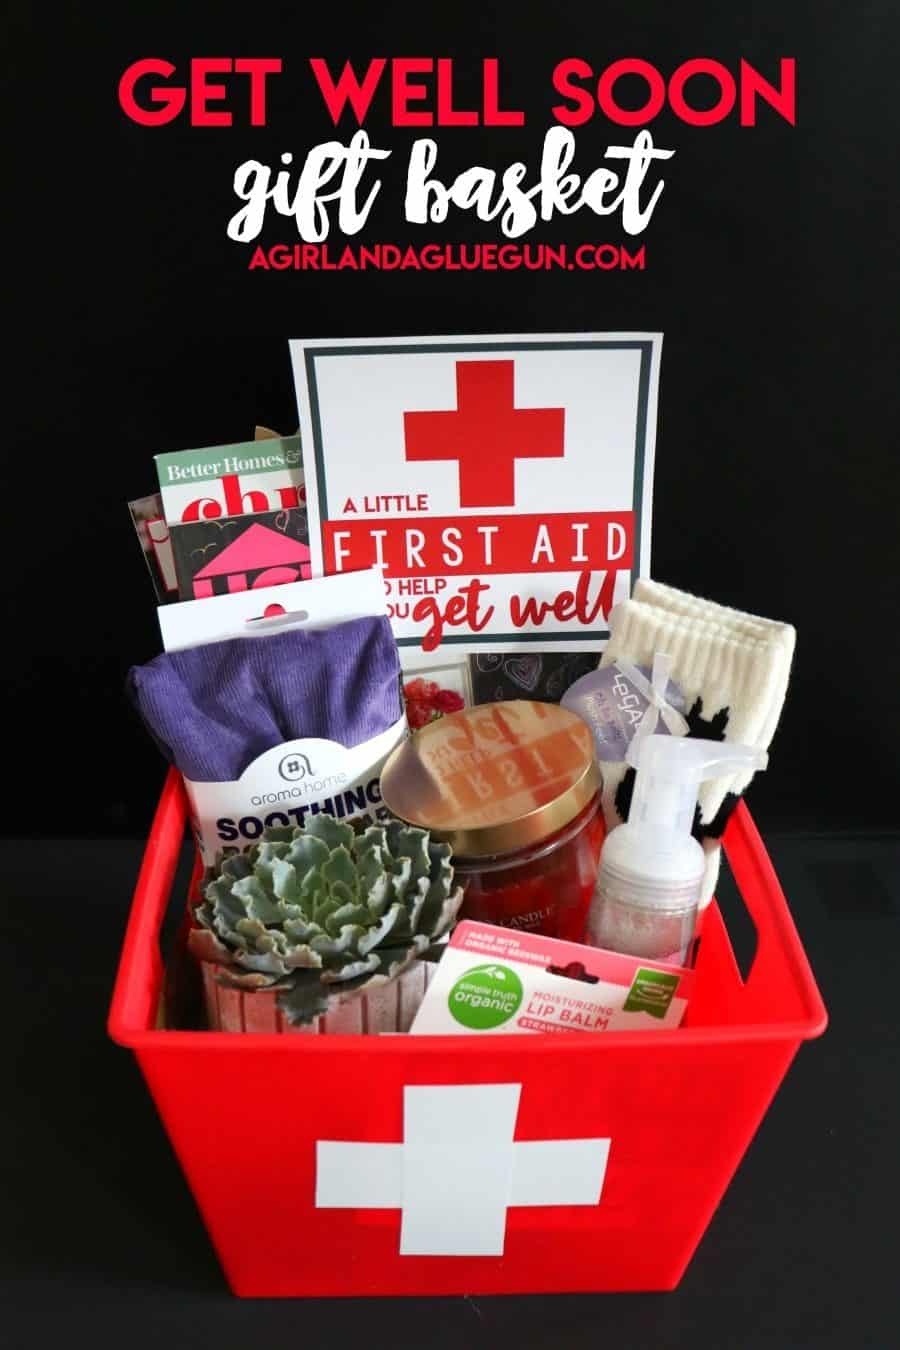 get-well-soon-gift-basket-idea-first-aid-kit--900x1350 (1)